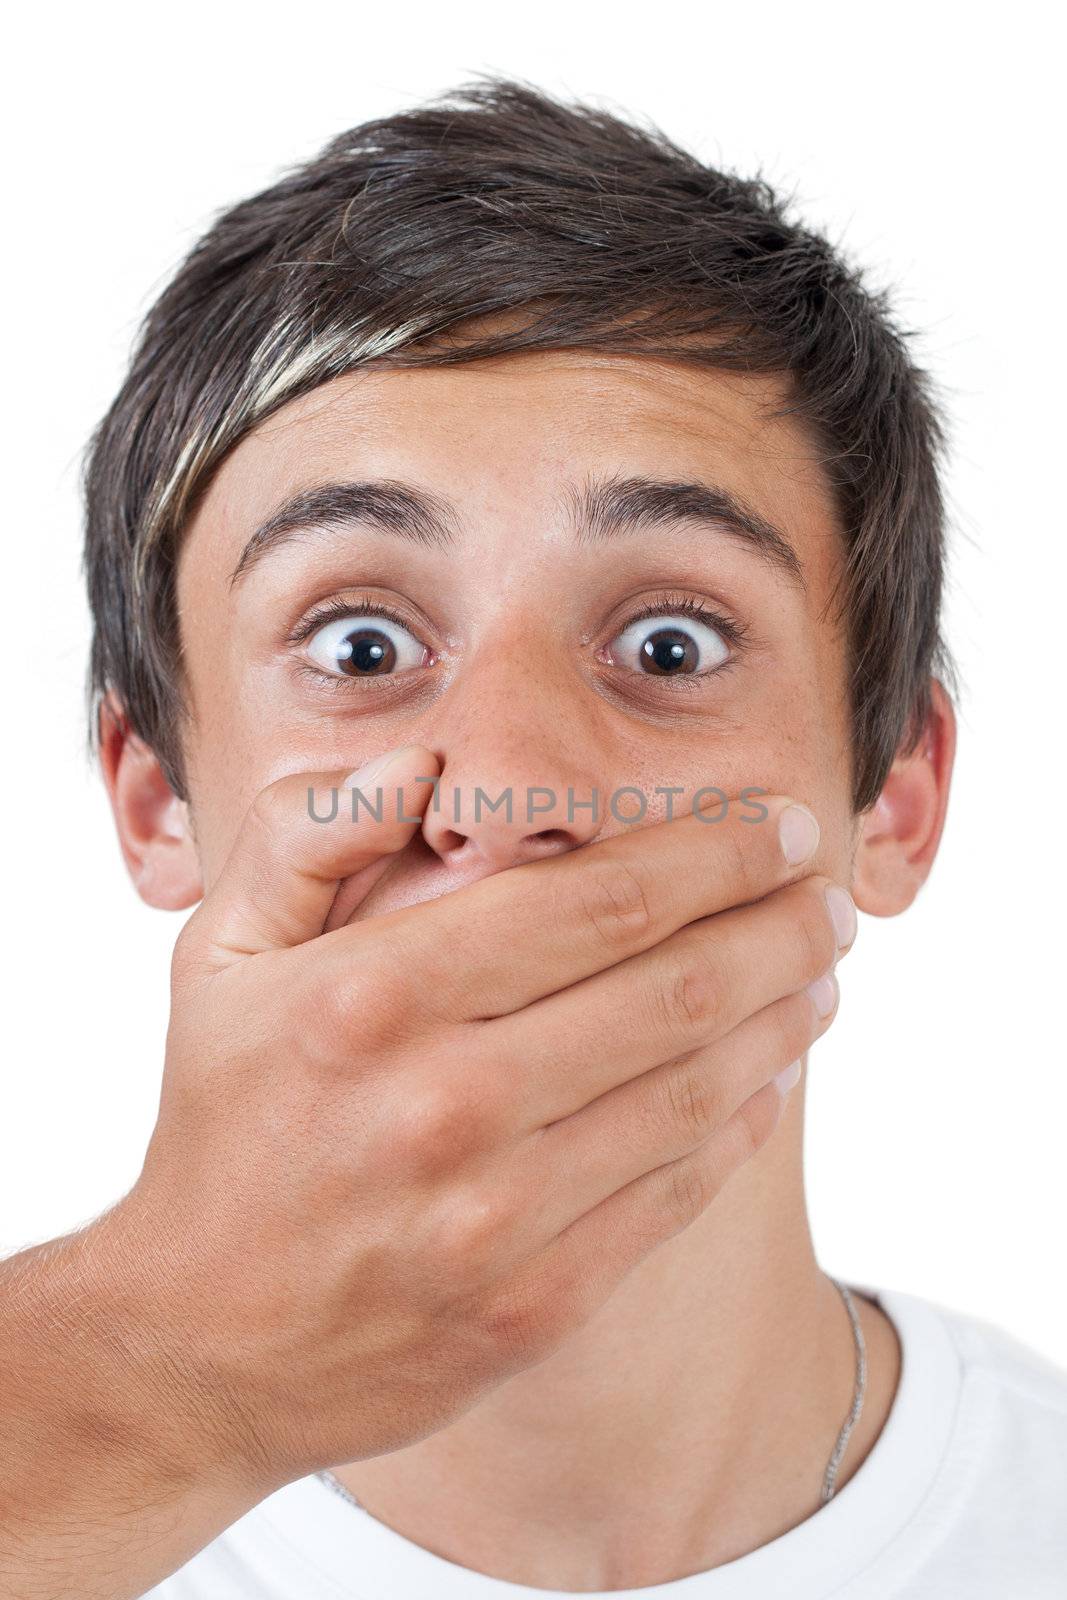 afraid swarthy victim man with hand covering his mouth  - isolated on white background